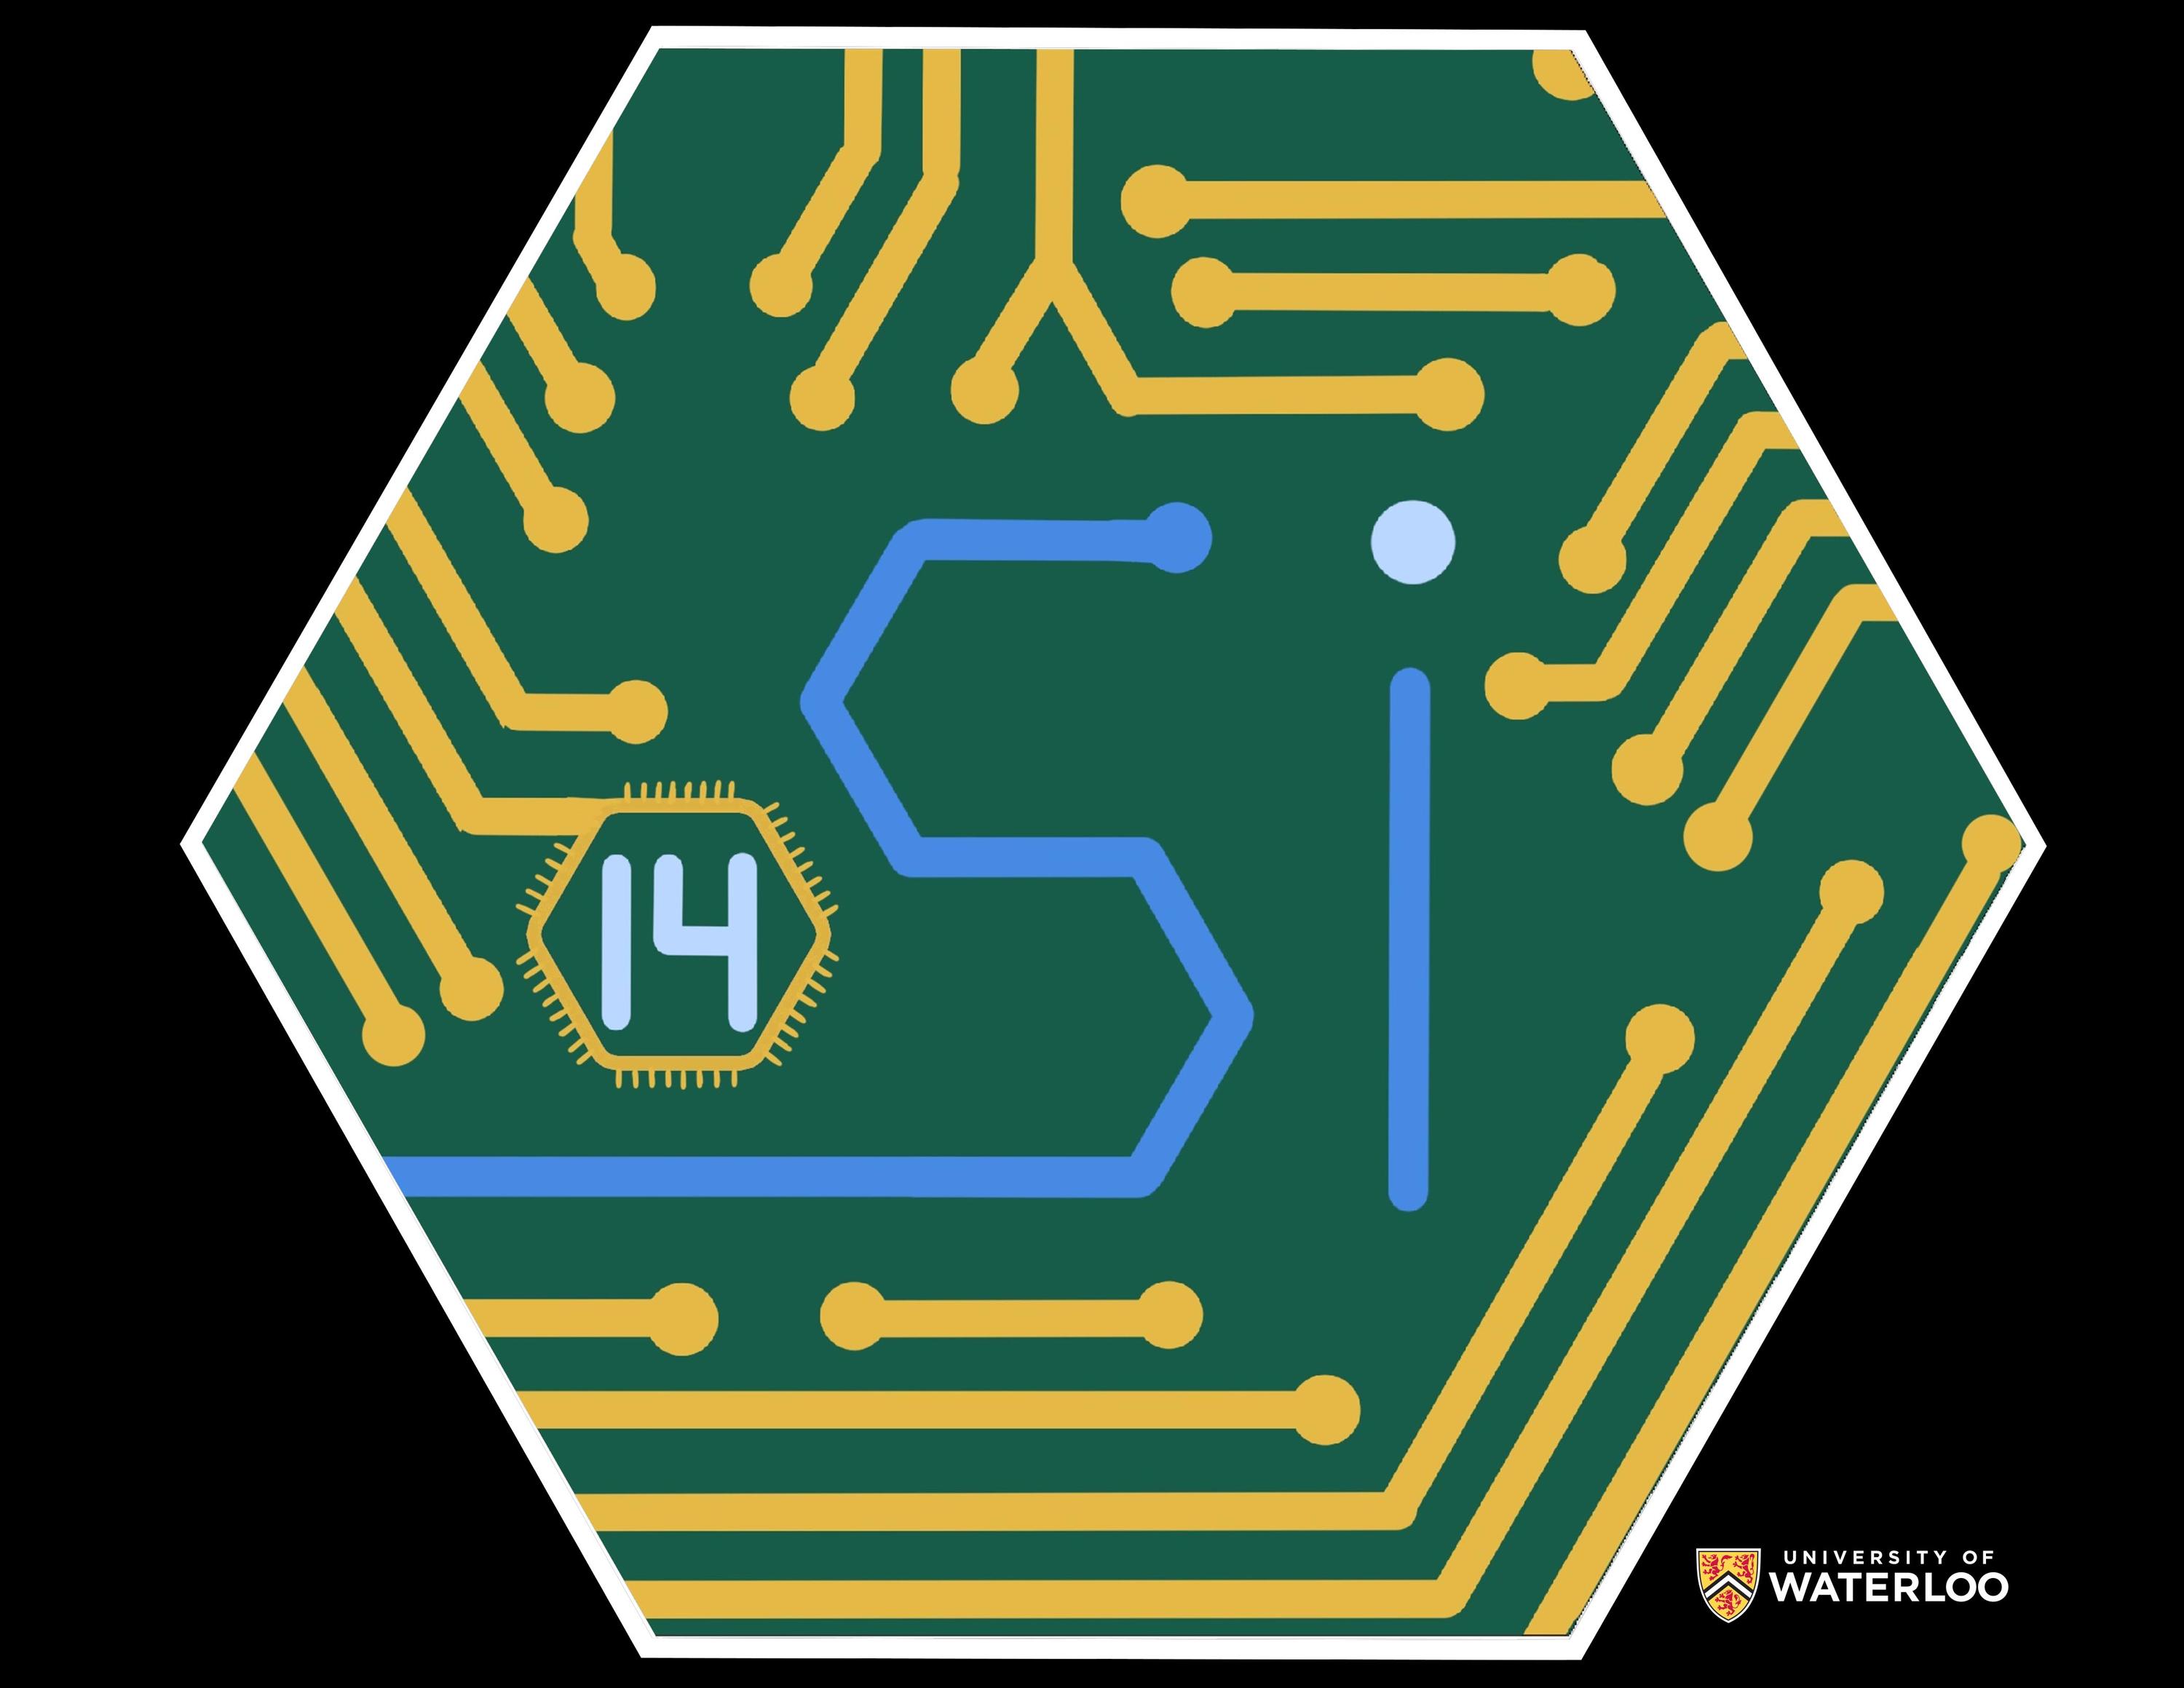 Digital image. Chemical symbol “Si” and atomic number “14” drawn to look like semiconducting electronics. Colors include gold, light blue, and blue on a green background.